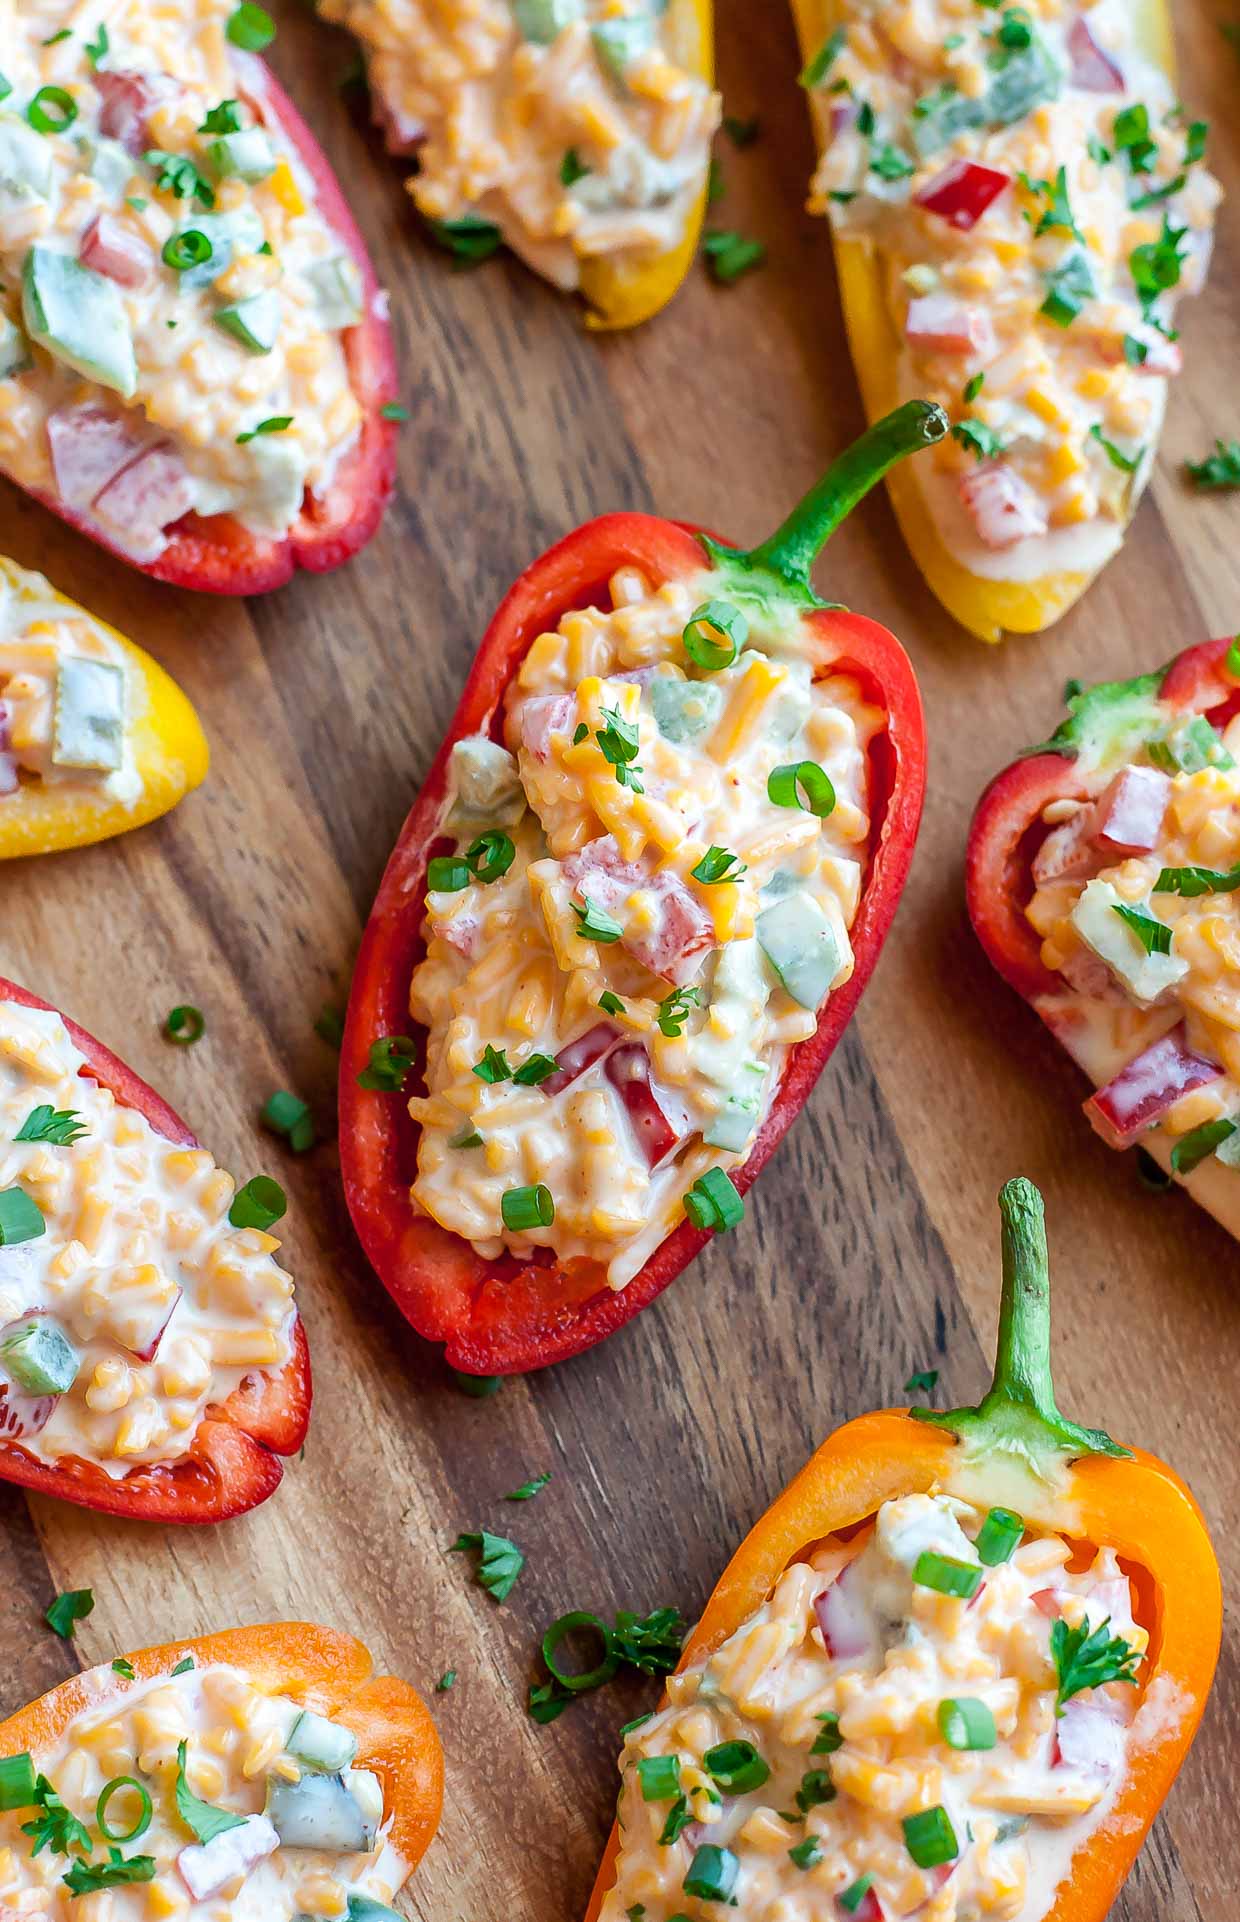 Sweet mini peppers and pimento cheese are a match made in snacking heaven! Serve these Pimento Cheese Stuffed Peppers at your next party or picnic and watch them disappear!